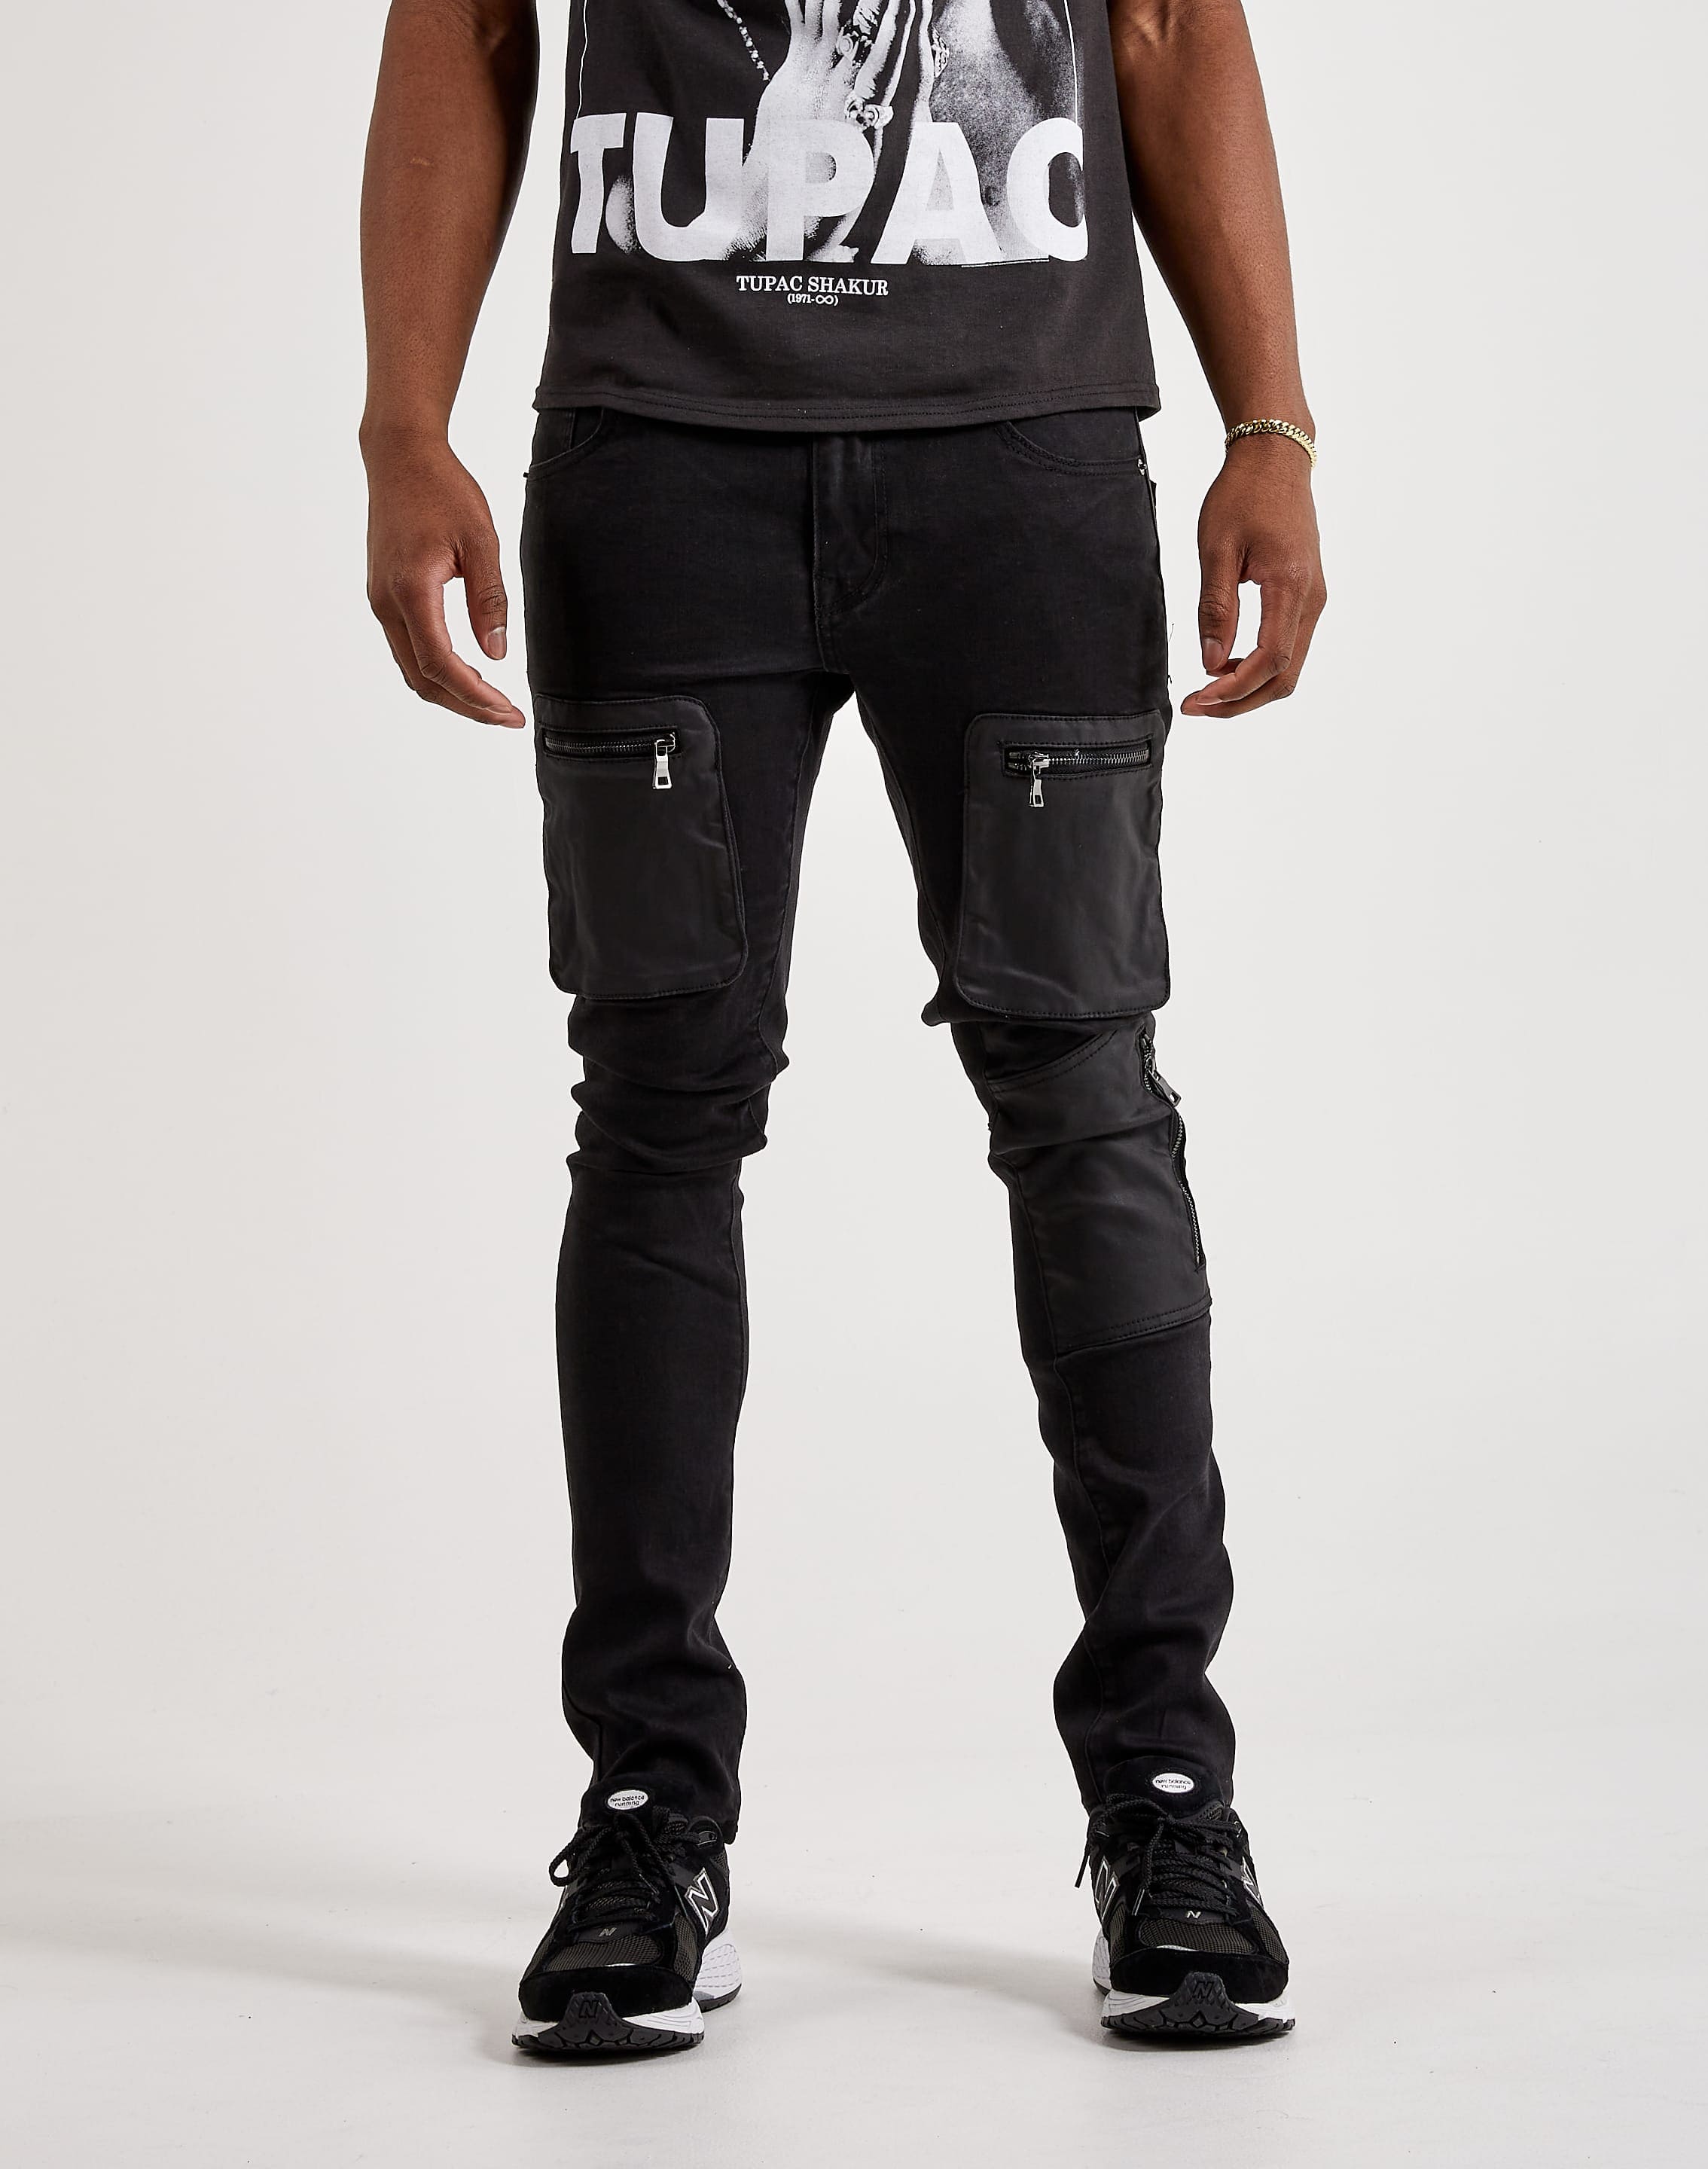 Gas jeans | Gas jeans, Men casual, Mens tops